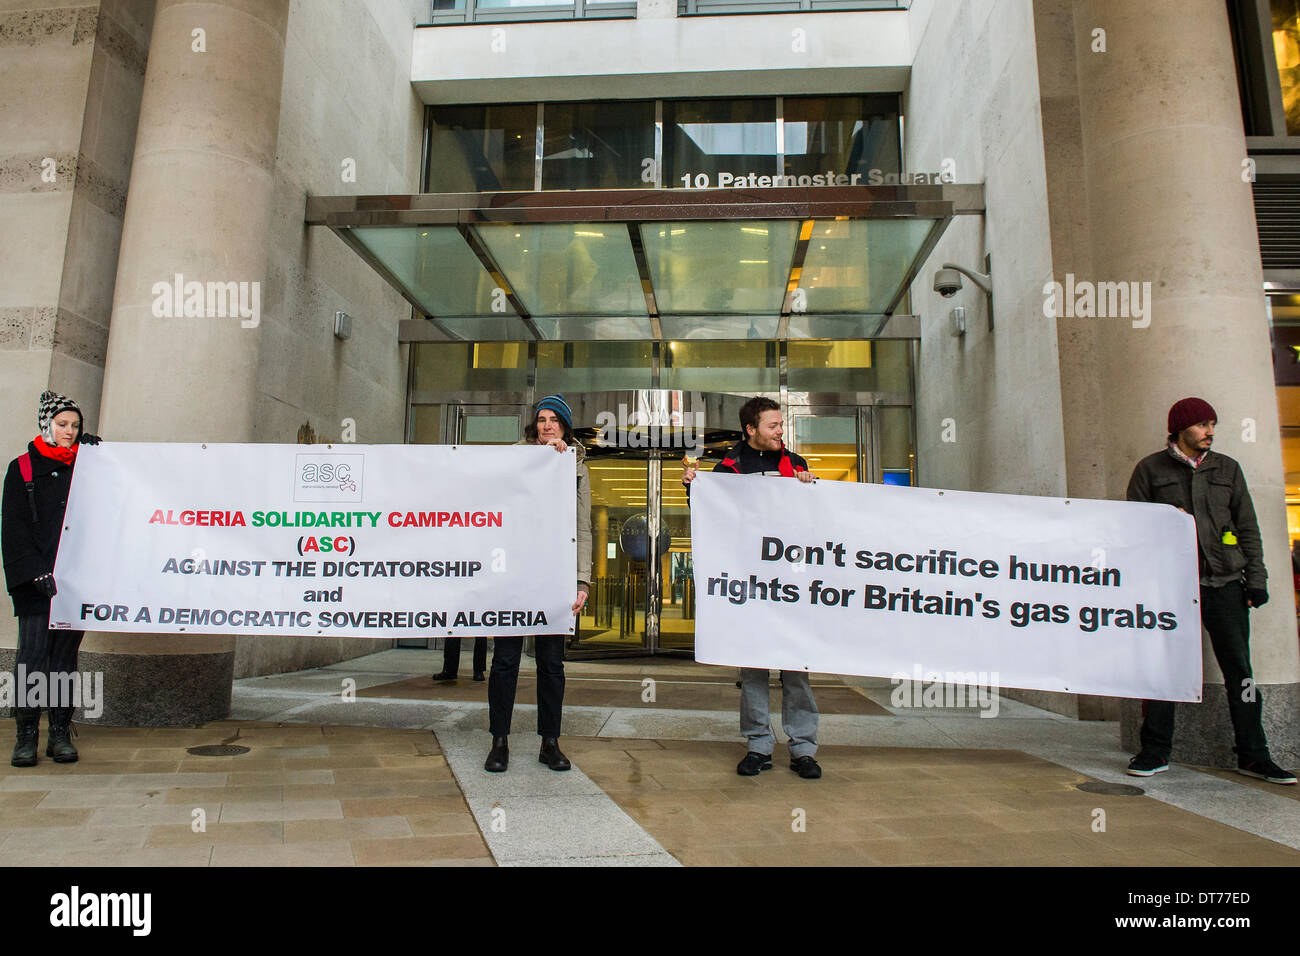 London, UK. 11th February 2014. Human rights protestors from the Algeria Solidarity Campaign (ASC) gather outside the London Stock Exchange to raise awareness about what they call ‘the repressive Algerian regime’ and its links with powerful multinationals such as BP who are keen on its gas reserves. Inside there is a business conference – The Algerian Investor Window – protestors hope to highlight issues about “British collusion with a repressive and corrupt regime for the sake of business interests and securing fossil fuel supplies” with the attendees. Credit:  Guy Bell/Alamy Live News Stock Photo